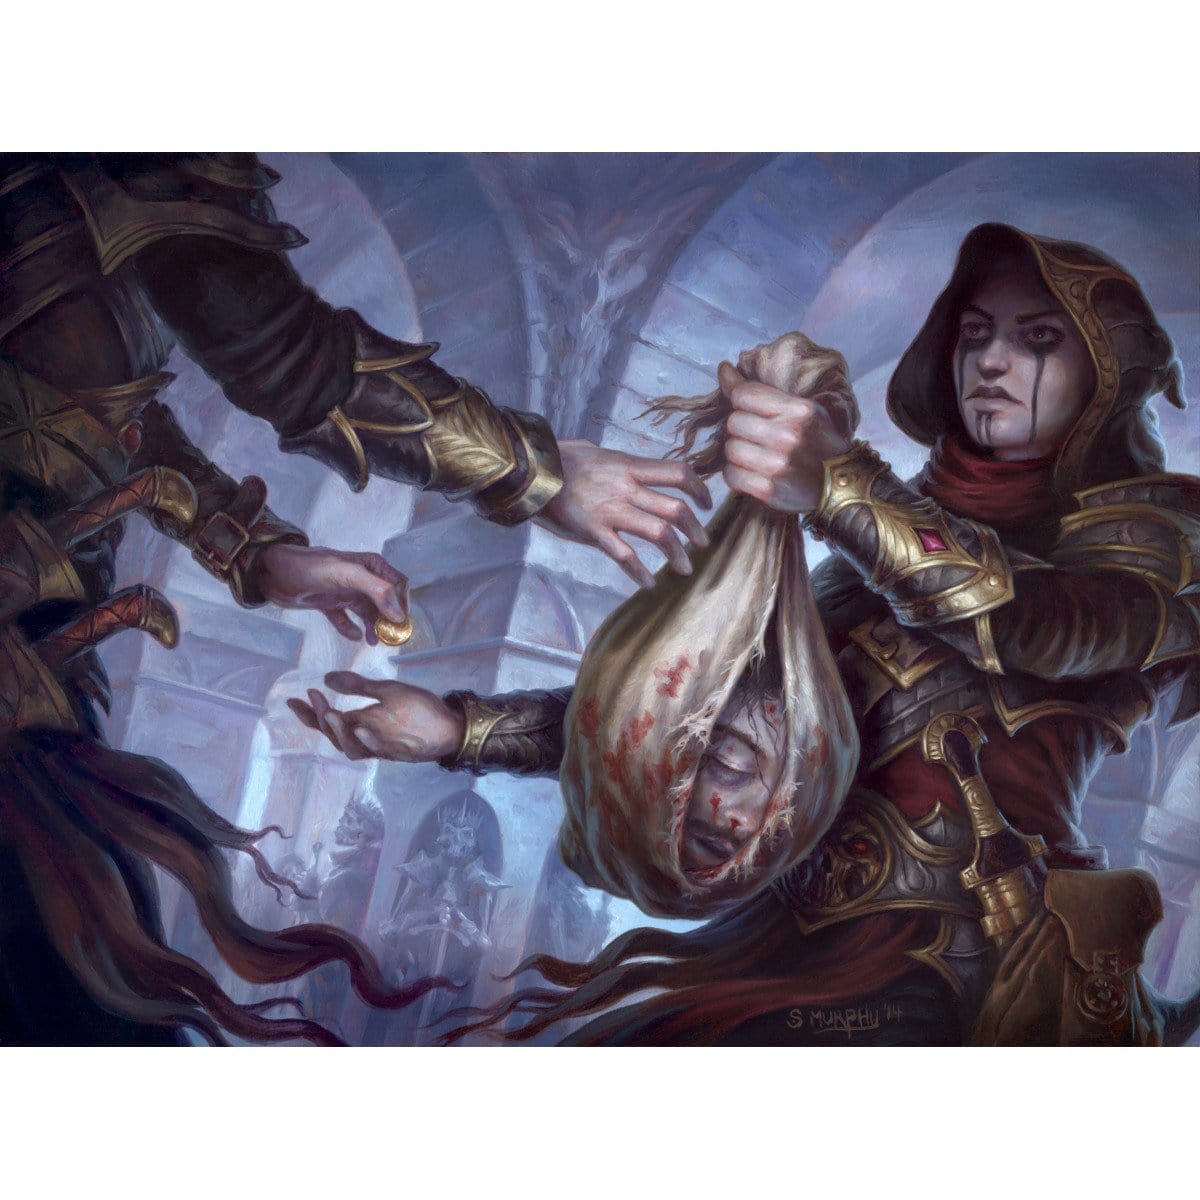 Ultimate Price Print - Print - Original Magic Art - Accessories for Magic the Gathering and other card games